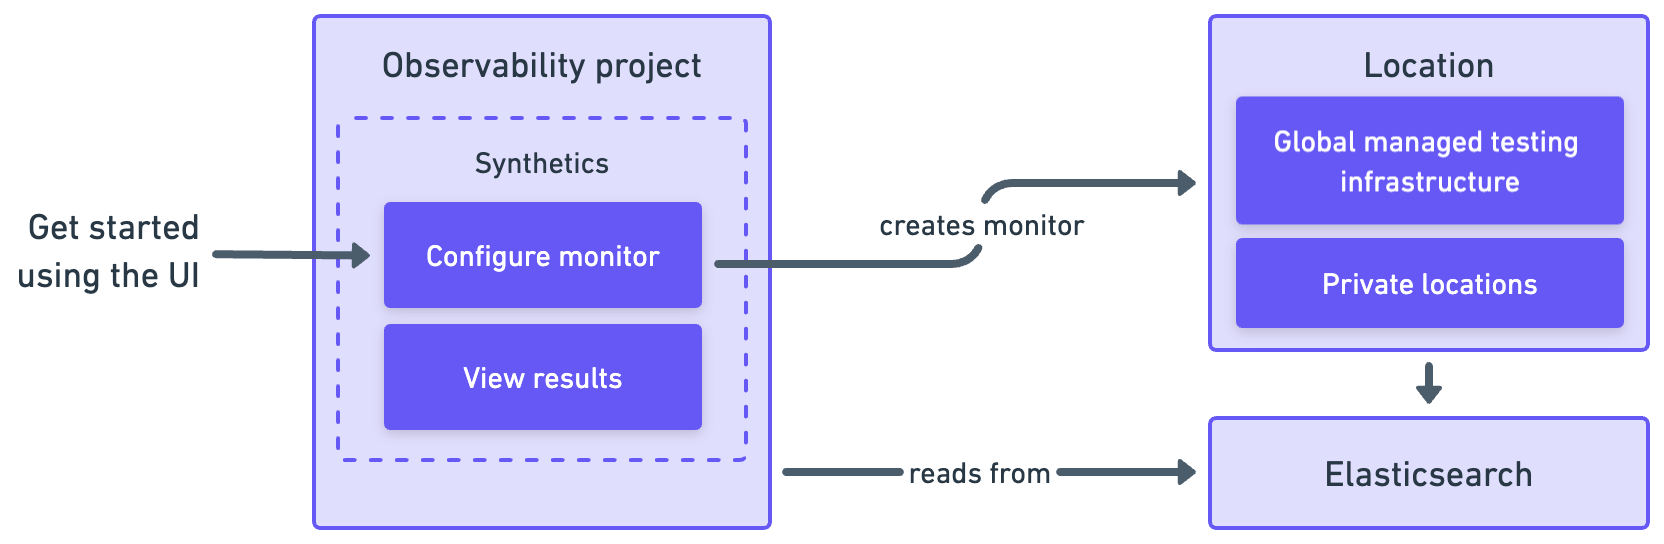 Diagram showing which pieces of software are used to configure monitors, create monitors, and view results when using Synthetics projects.